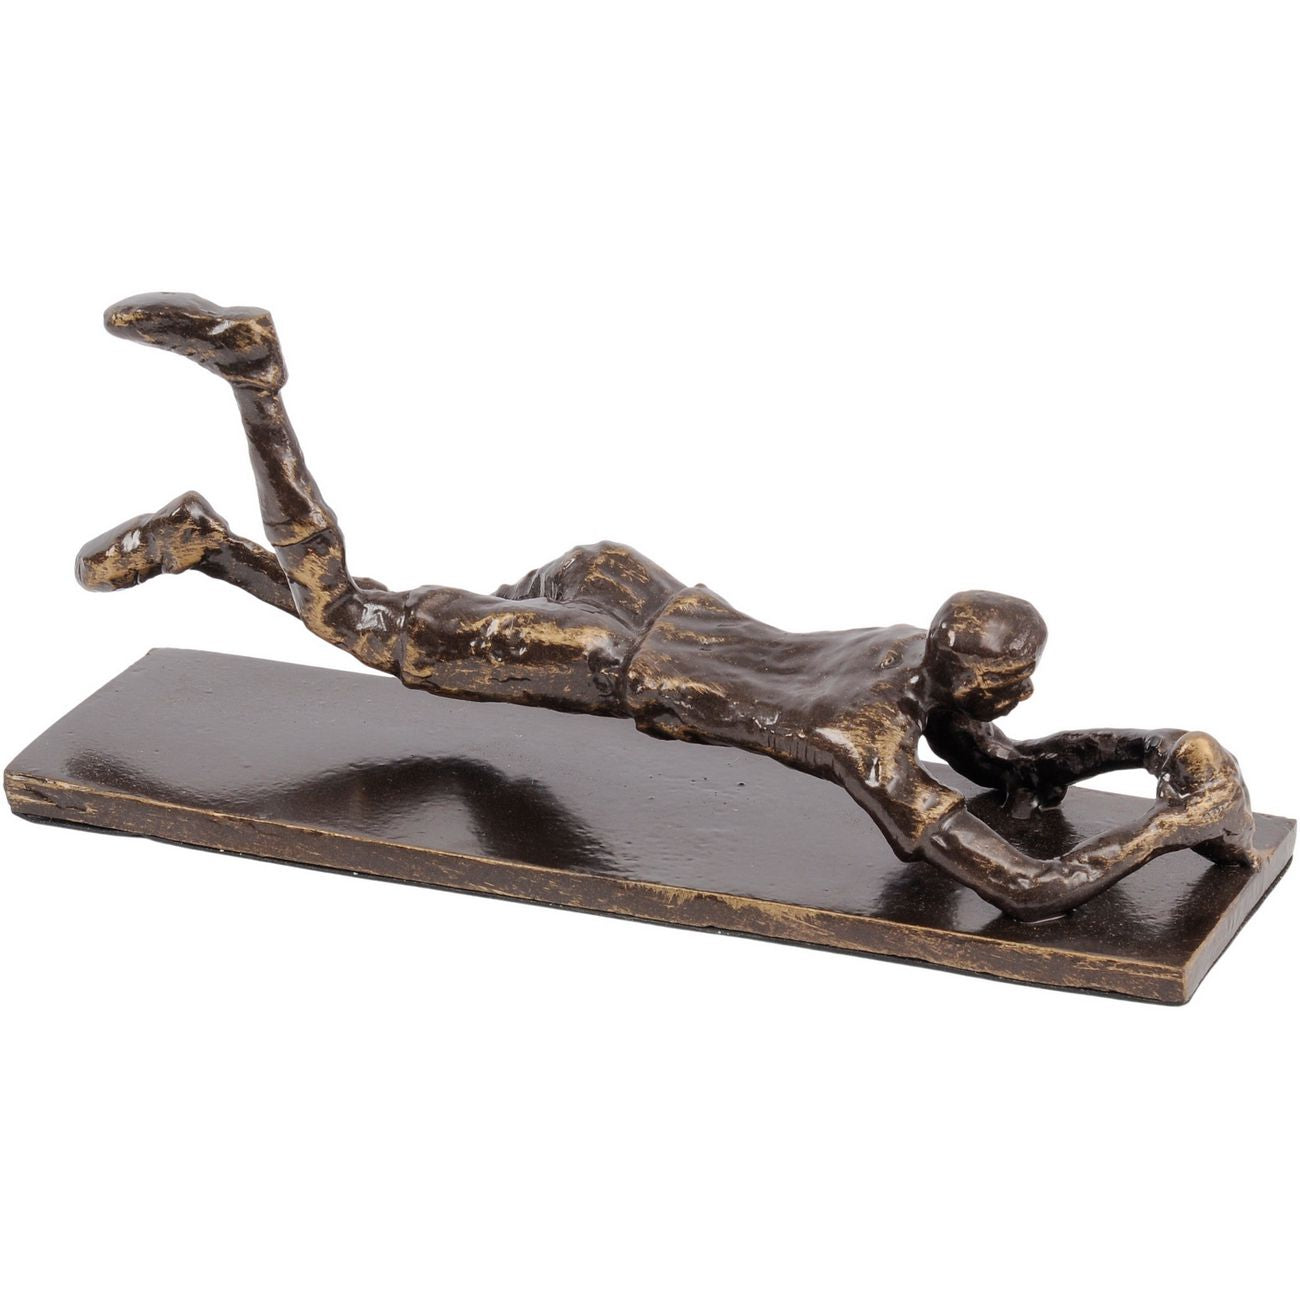 Try scorer rugby sculpture